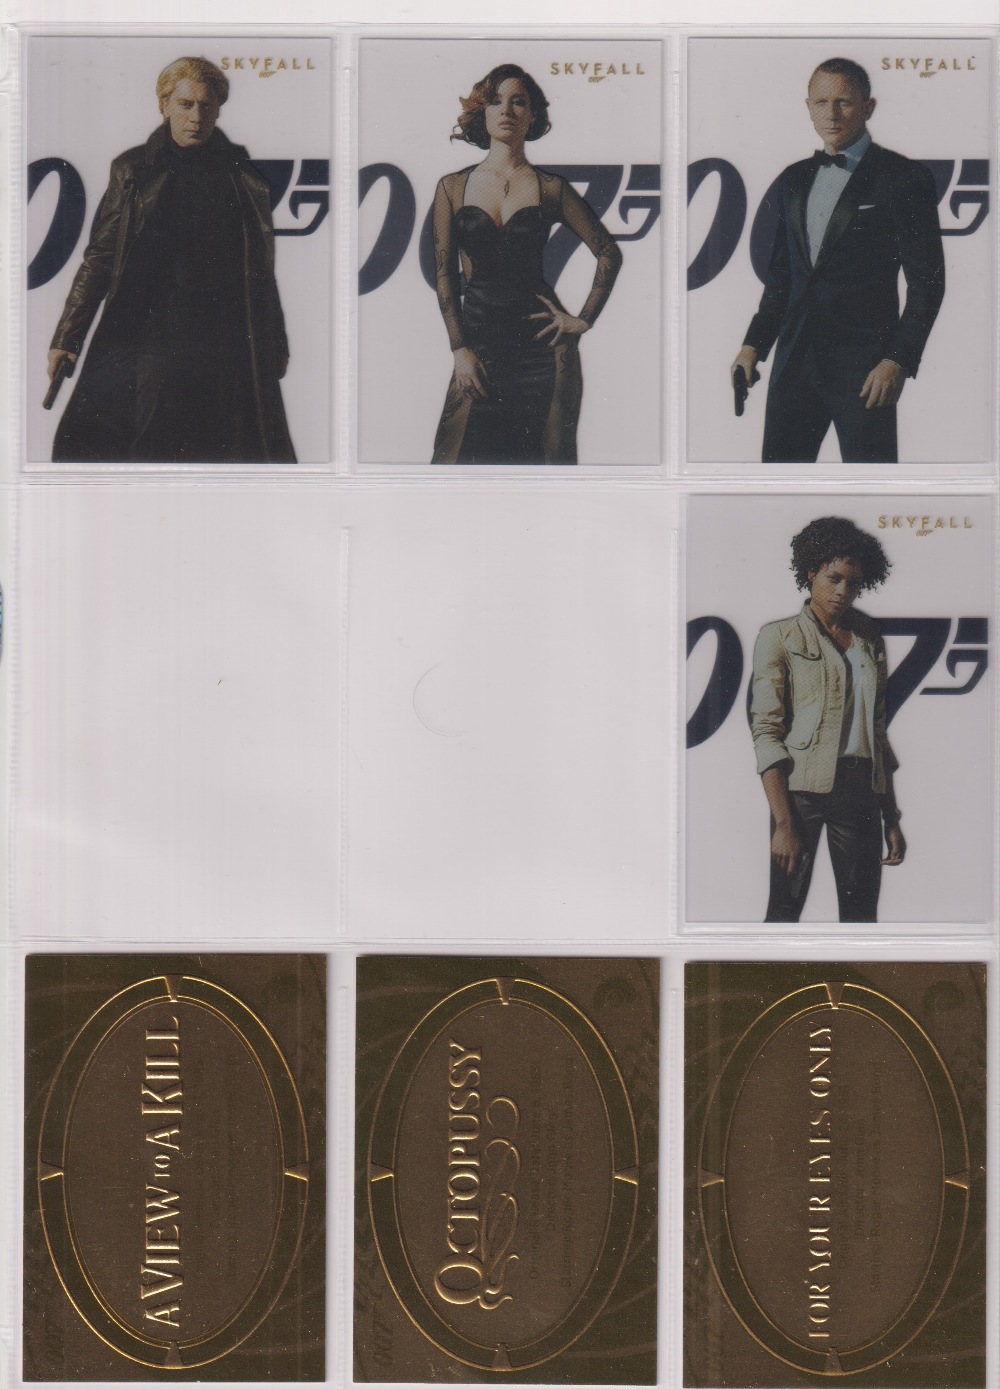 James Bond, 50th Anniversary Trading Cards Gold Cards (set of 198), Skyfall silhouette (4), Gold - Image 9 of 37